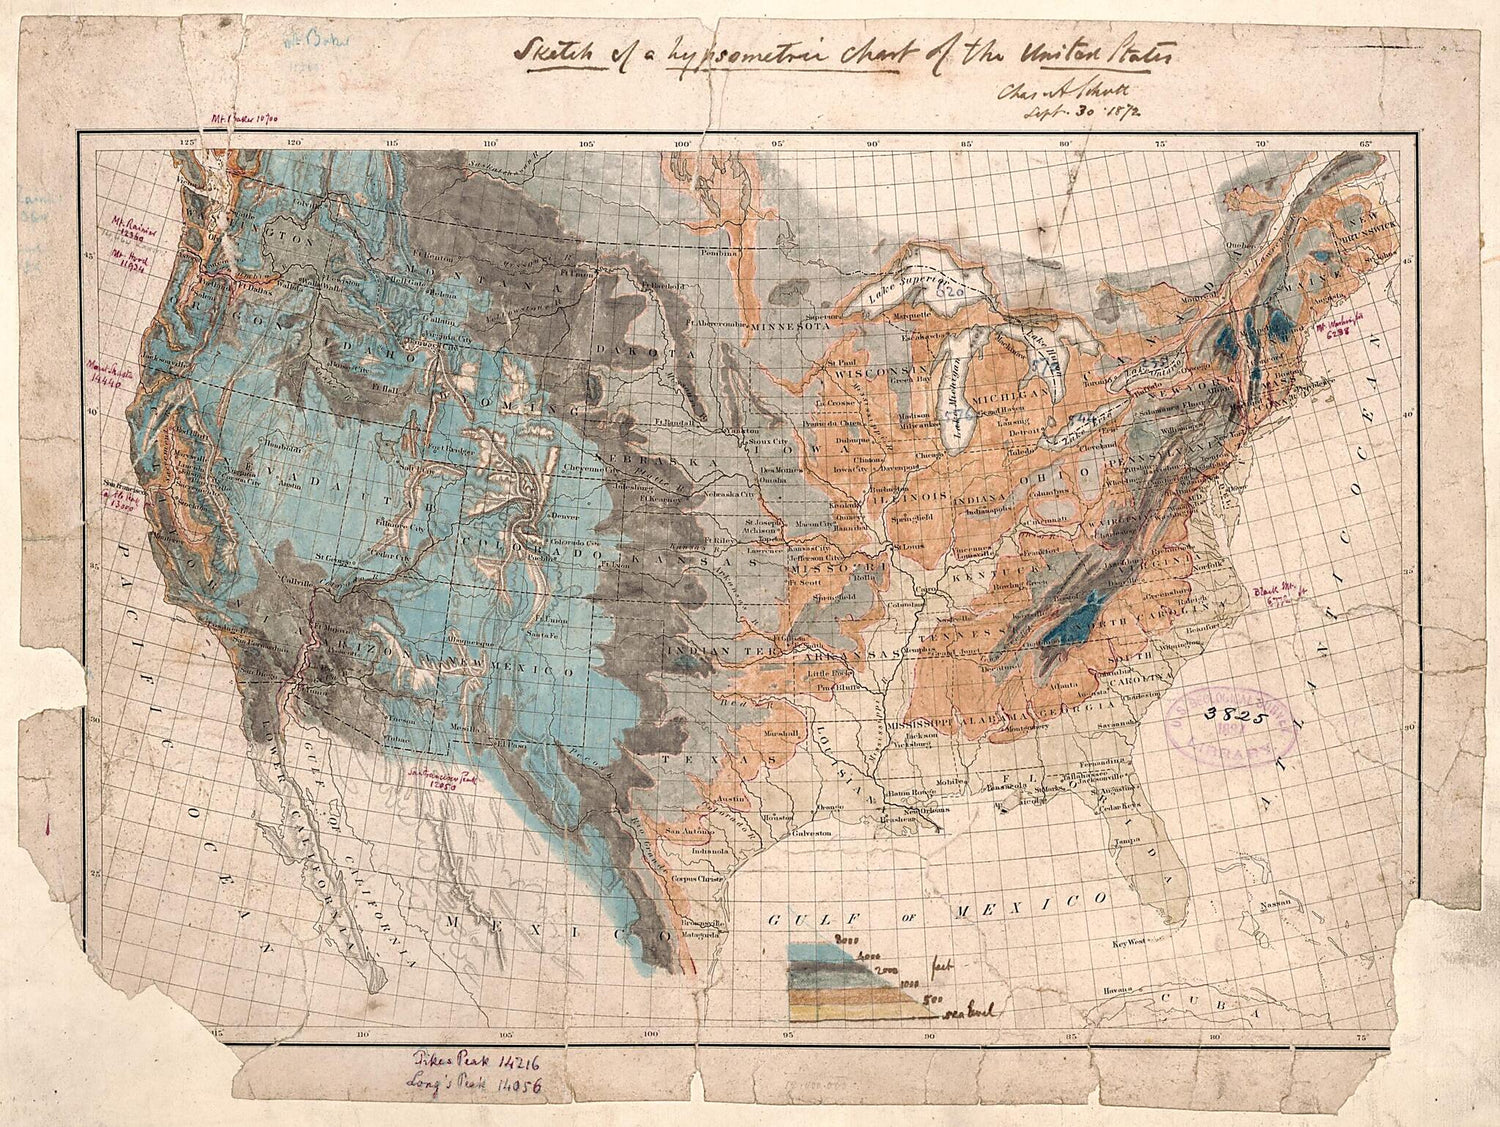 This old map of Sketch of a Hypsometric Chart of the United States from 1872 was created by Charles A. (Charles Anthony) Schott in 1872